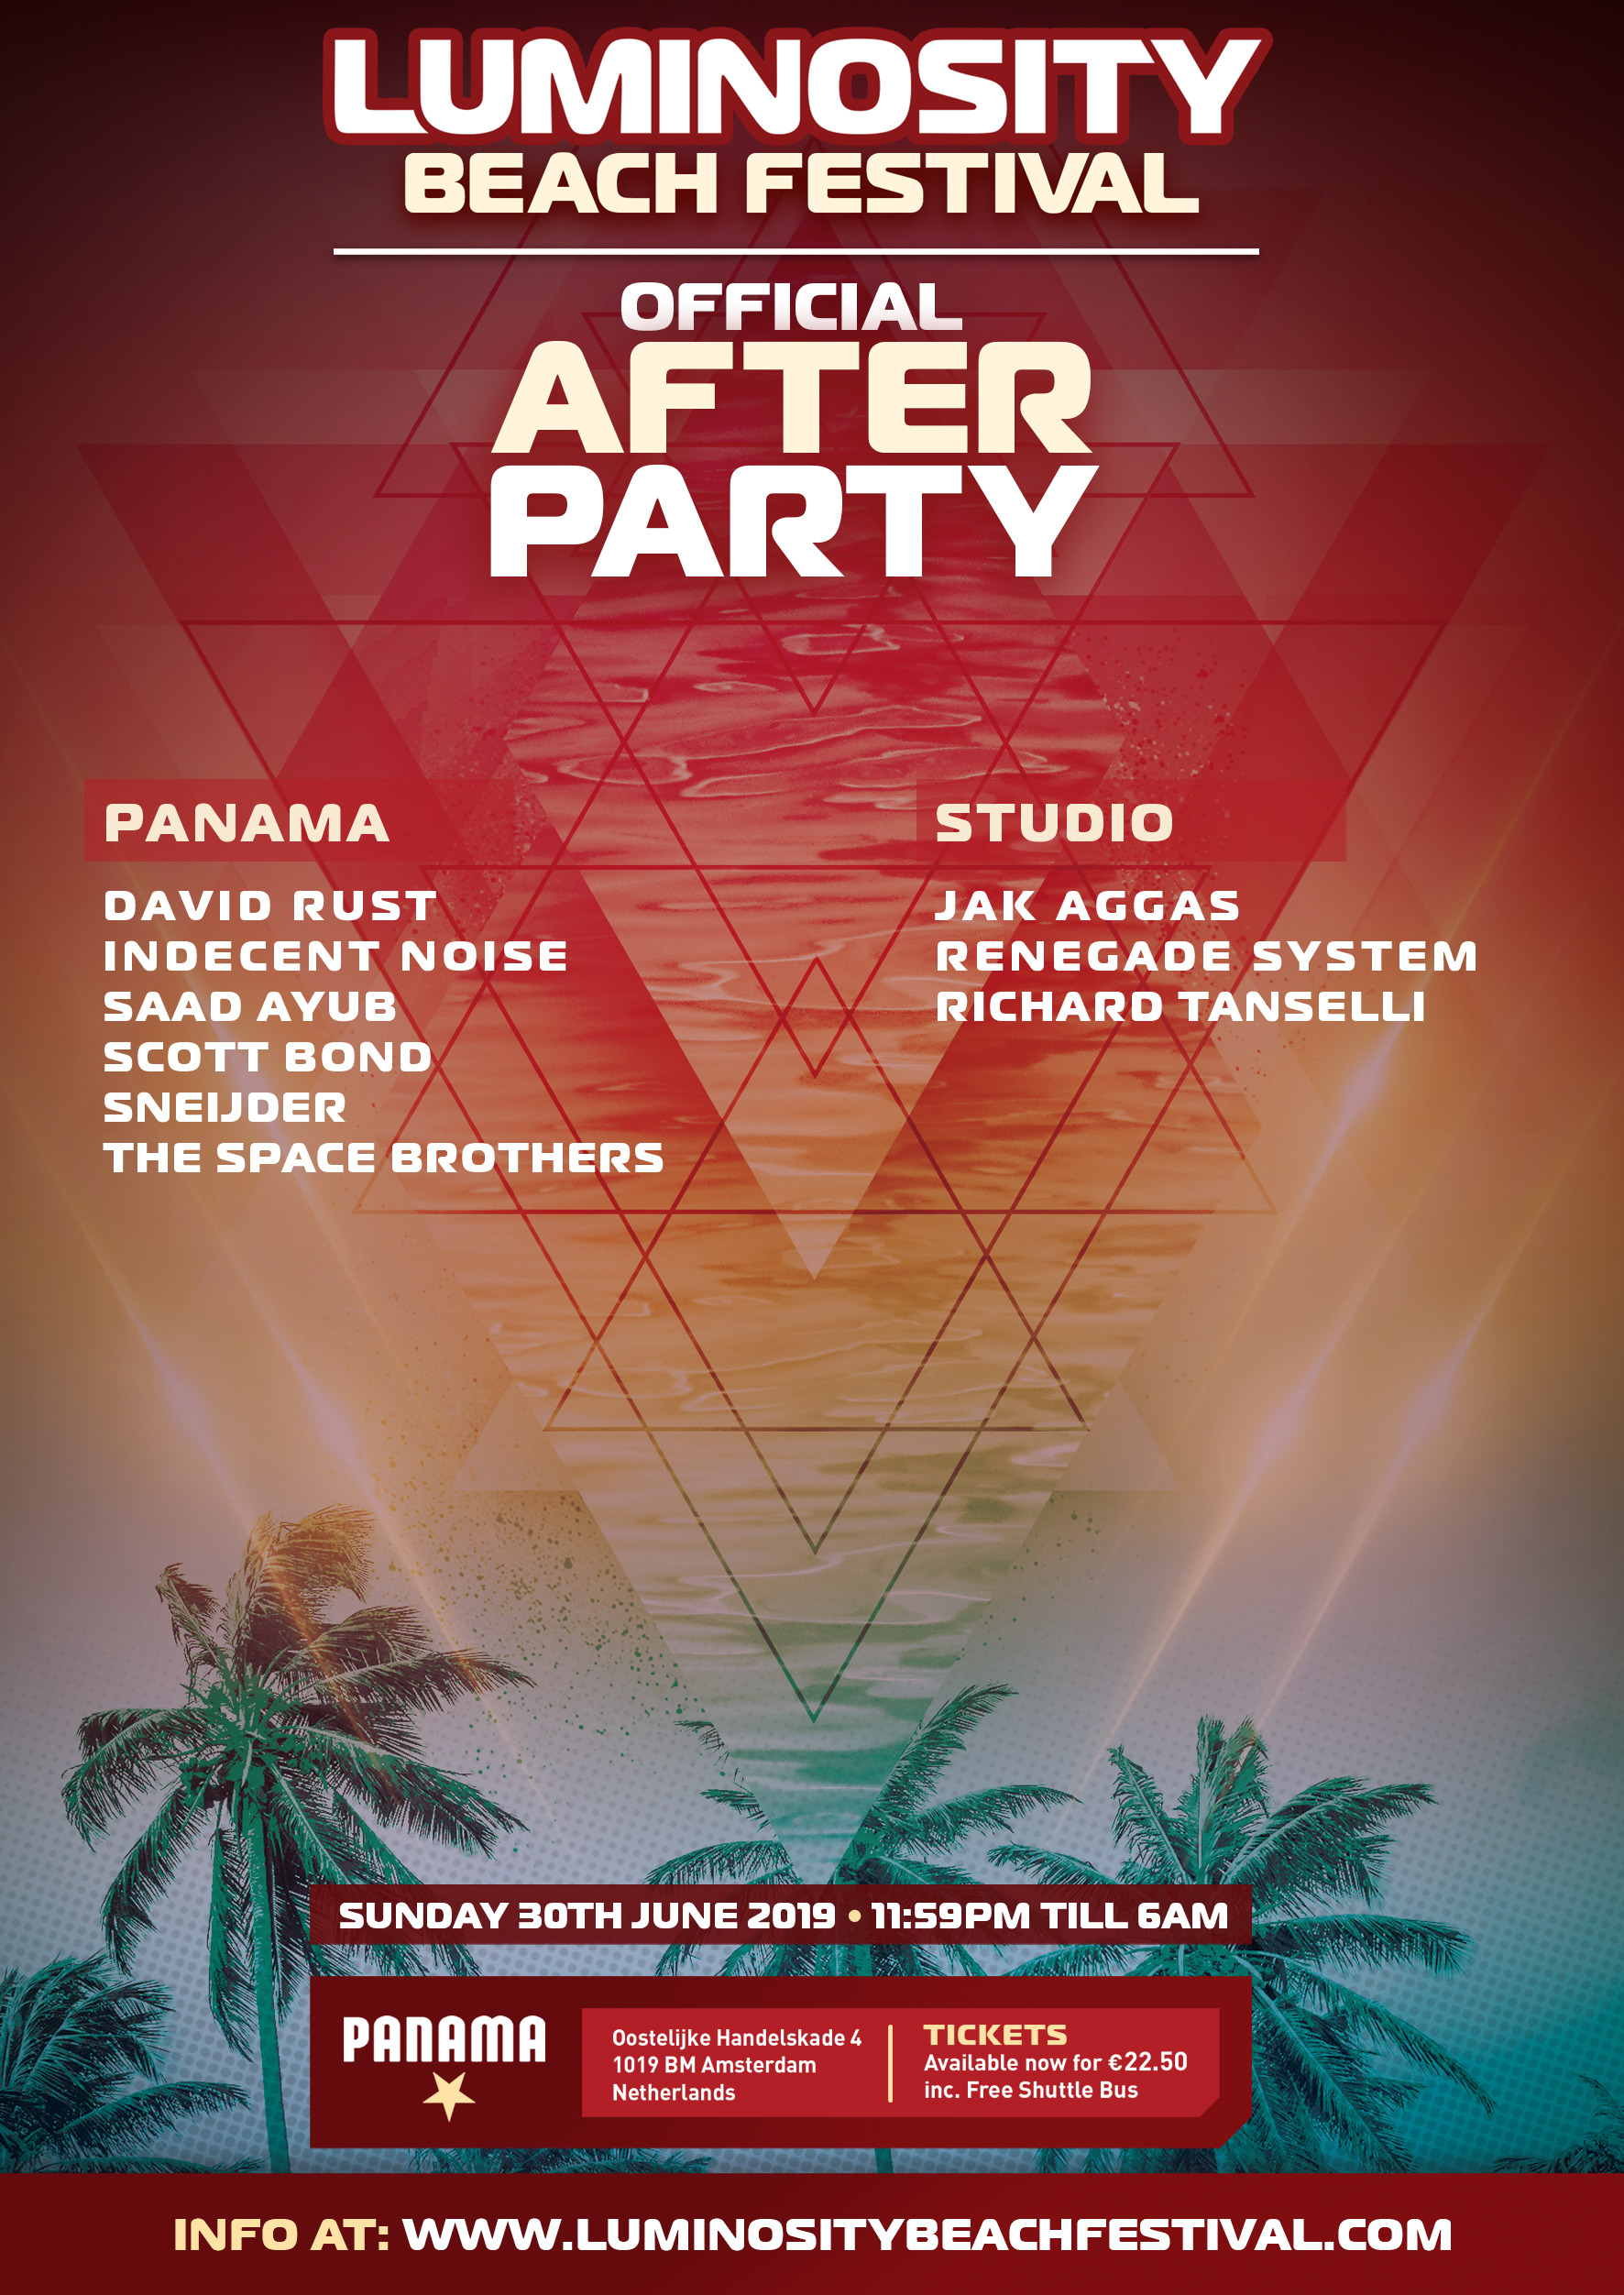 Luminosity Beach Festival 2019 – Official After Party | Luminosity Events